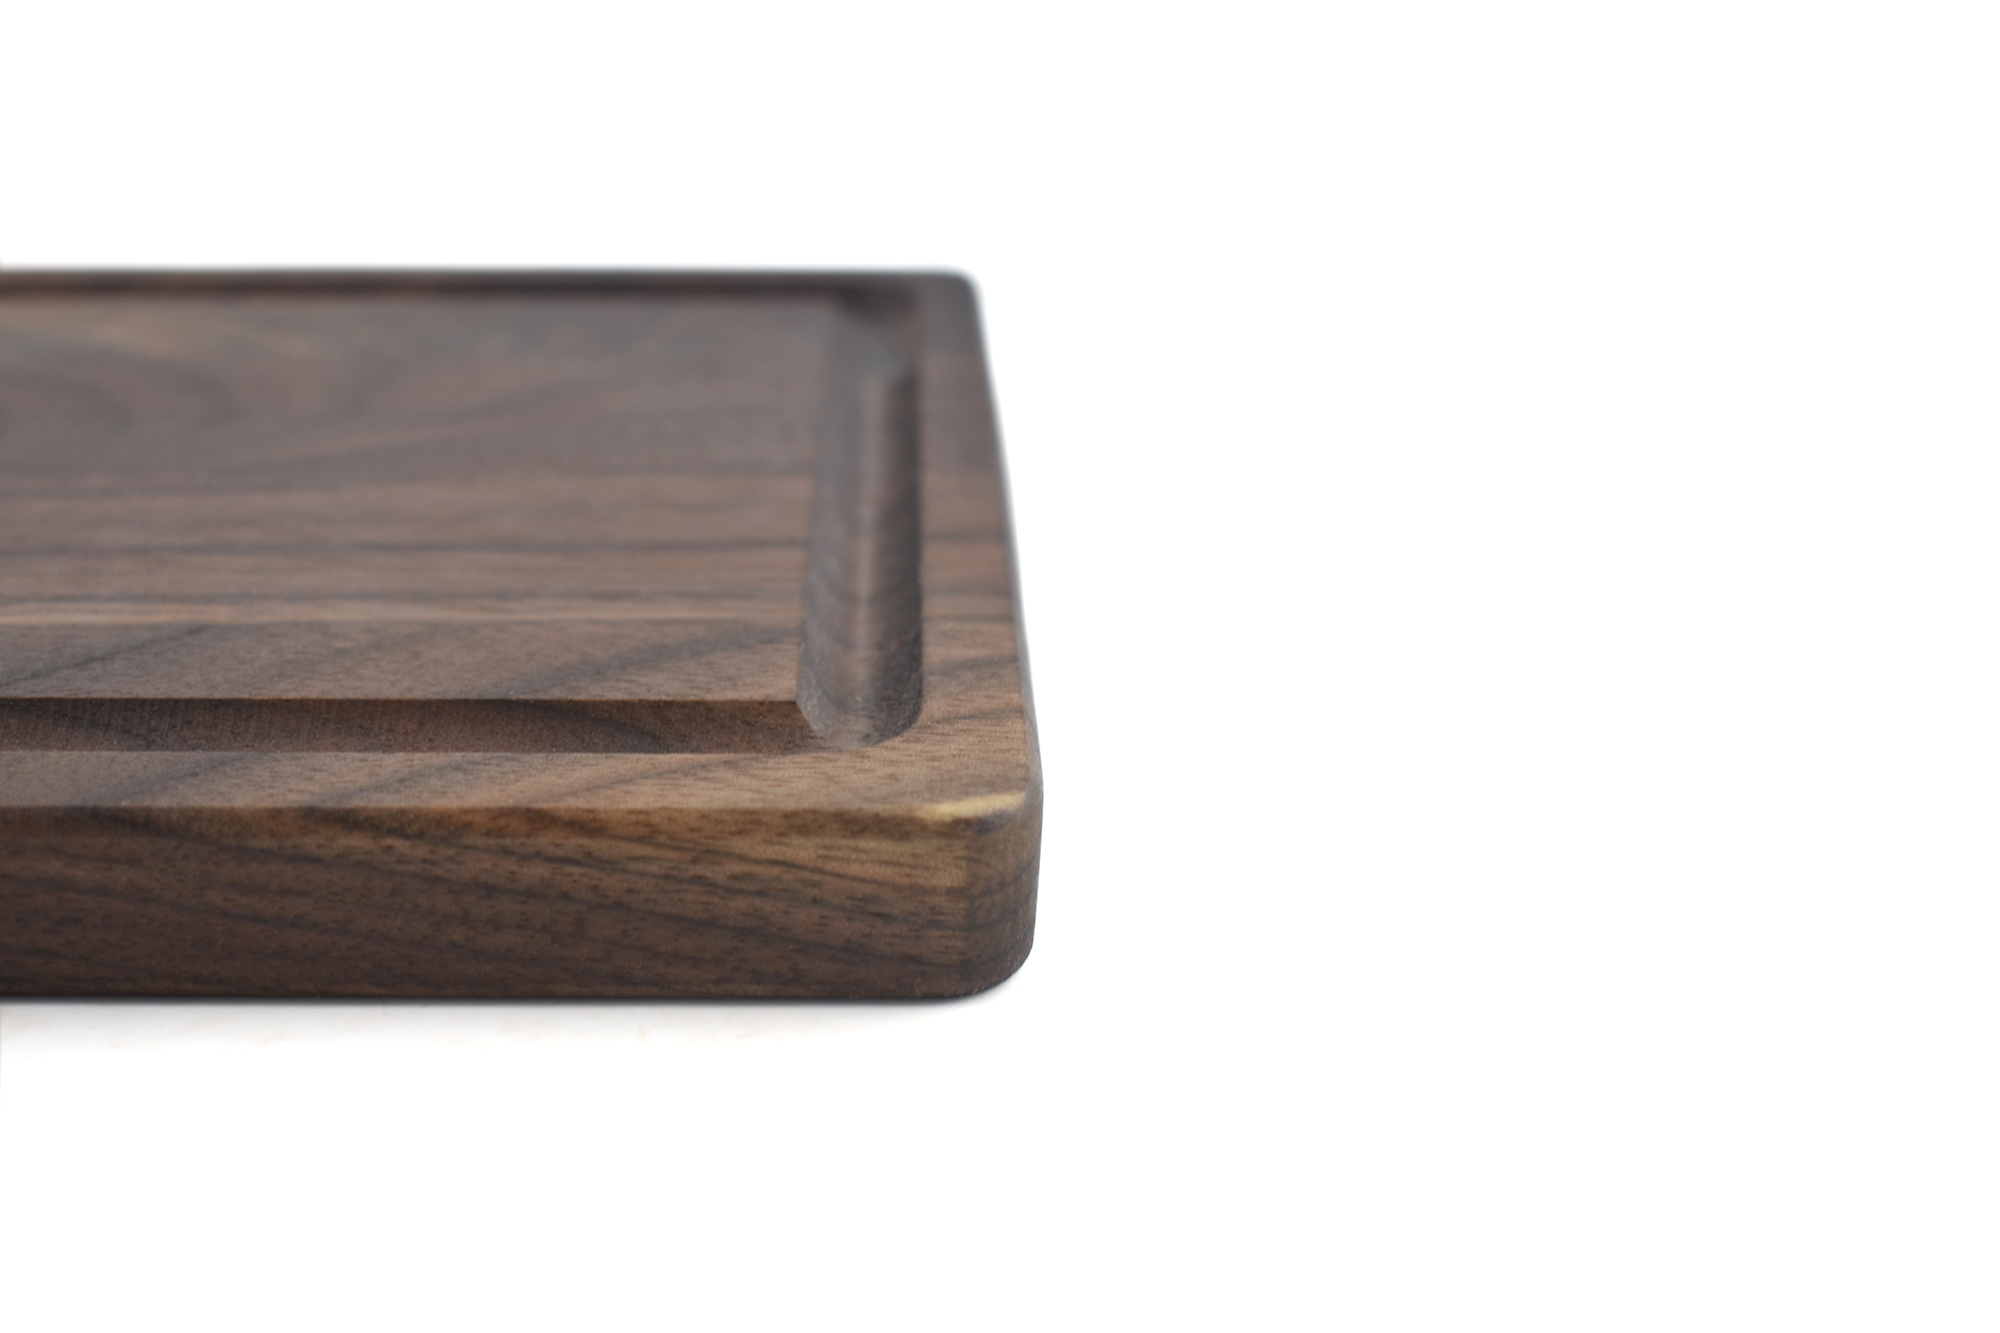 Small wooden cutting board with a handle